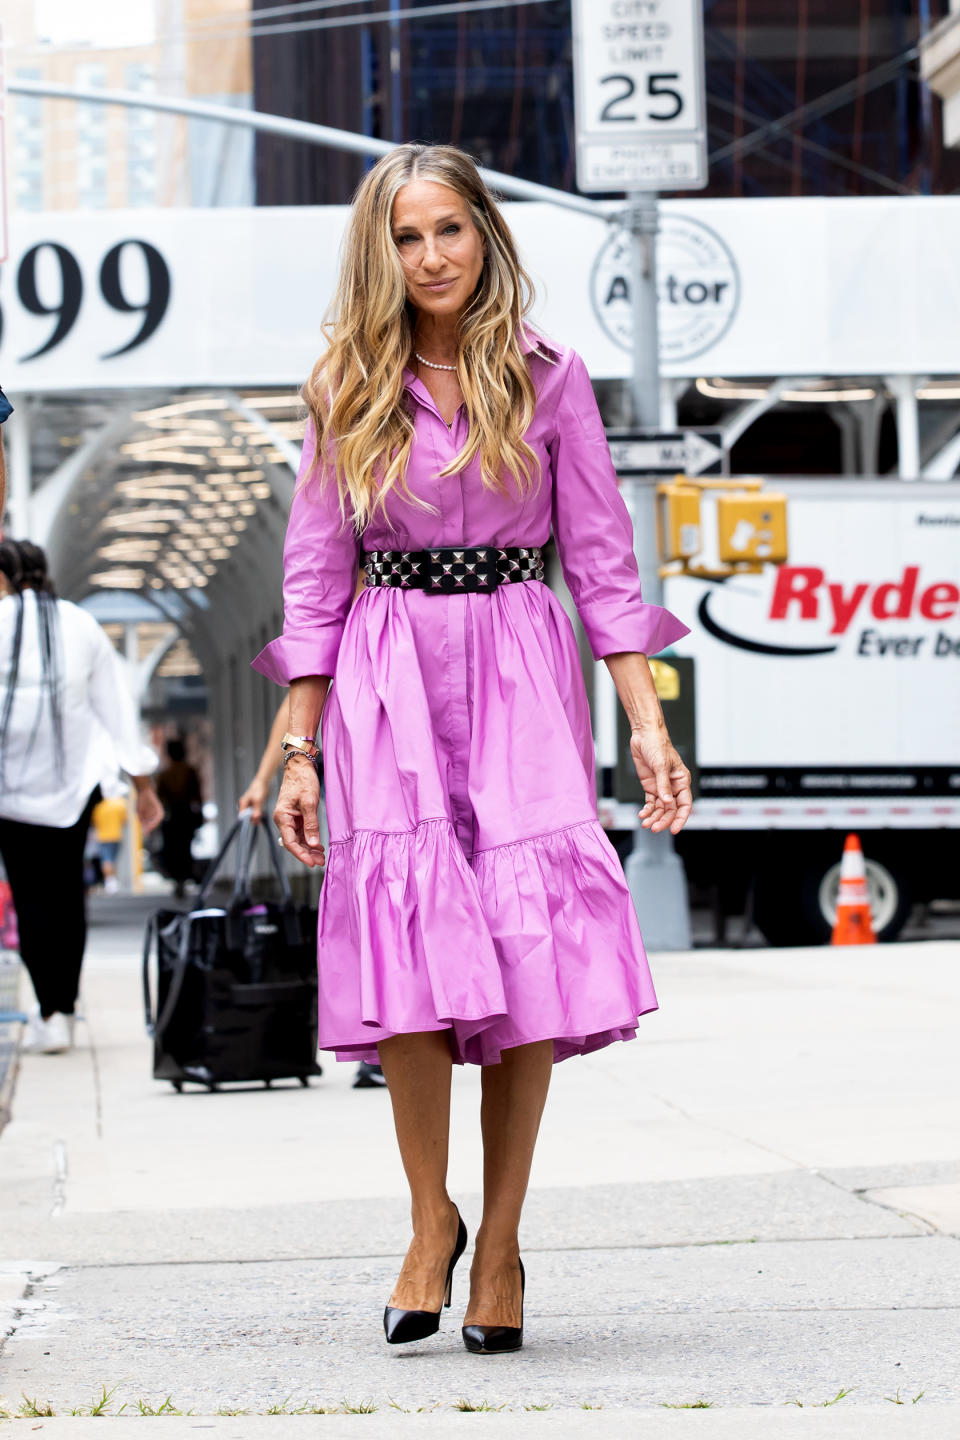 Sarah Jessica Parker films “And Just Like That…” in downtown New York City. - Credit: RCF / MEGA